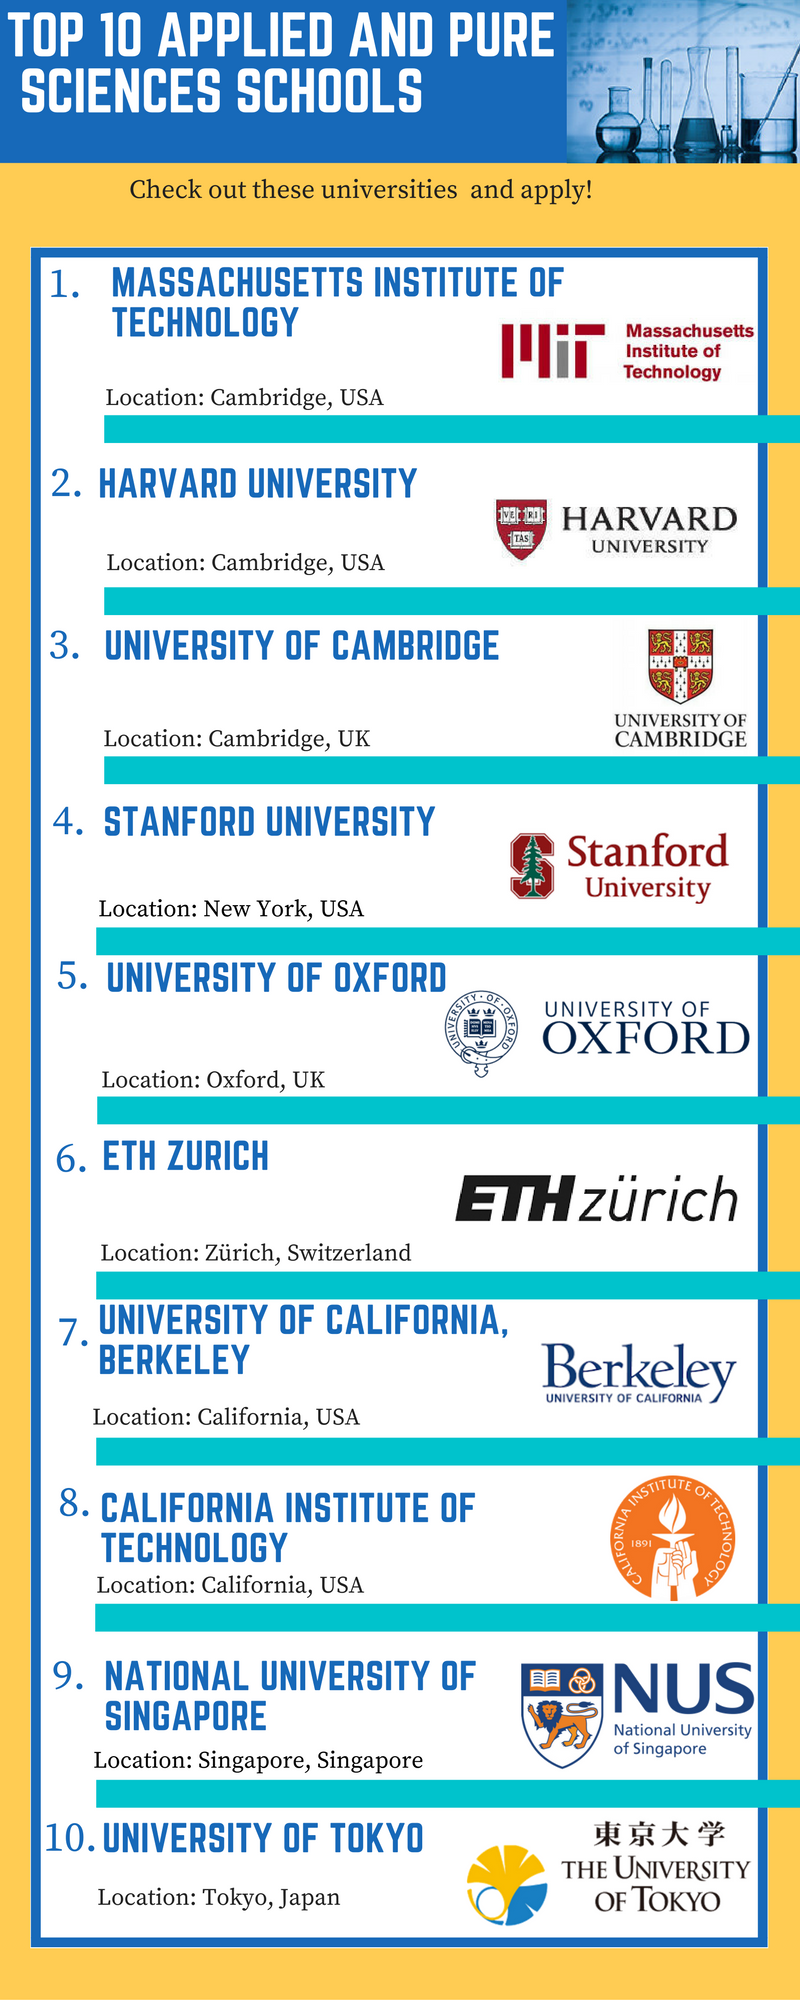 Top 10 applied and pure sciences schools.